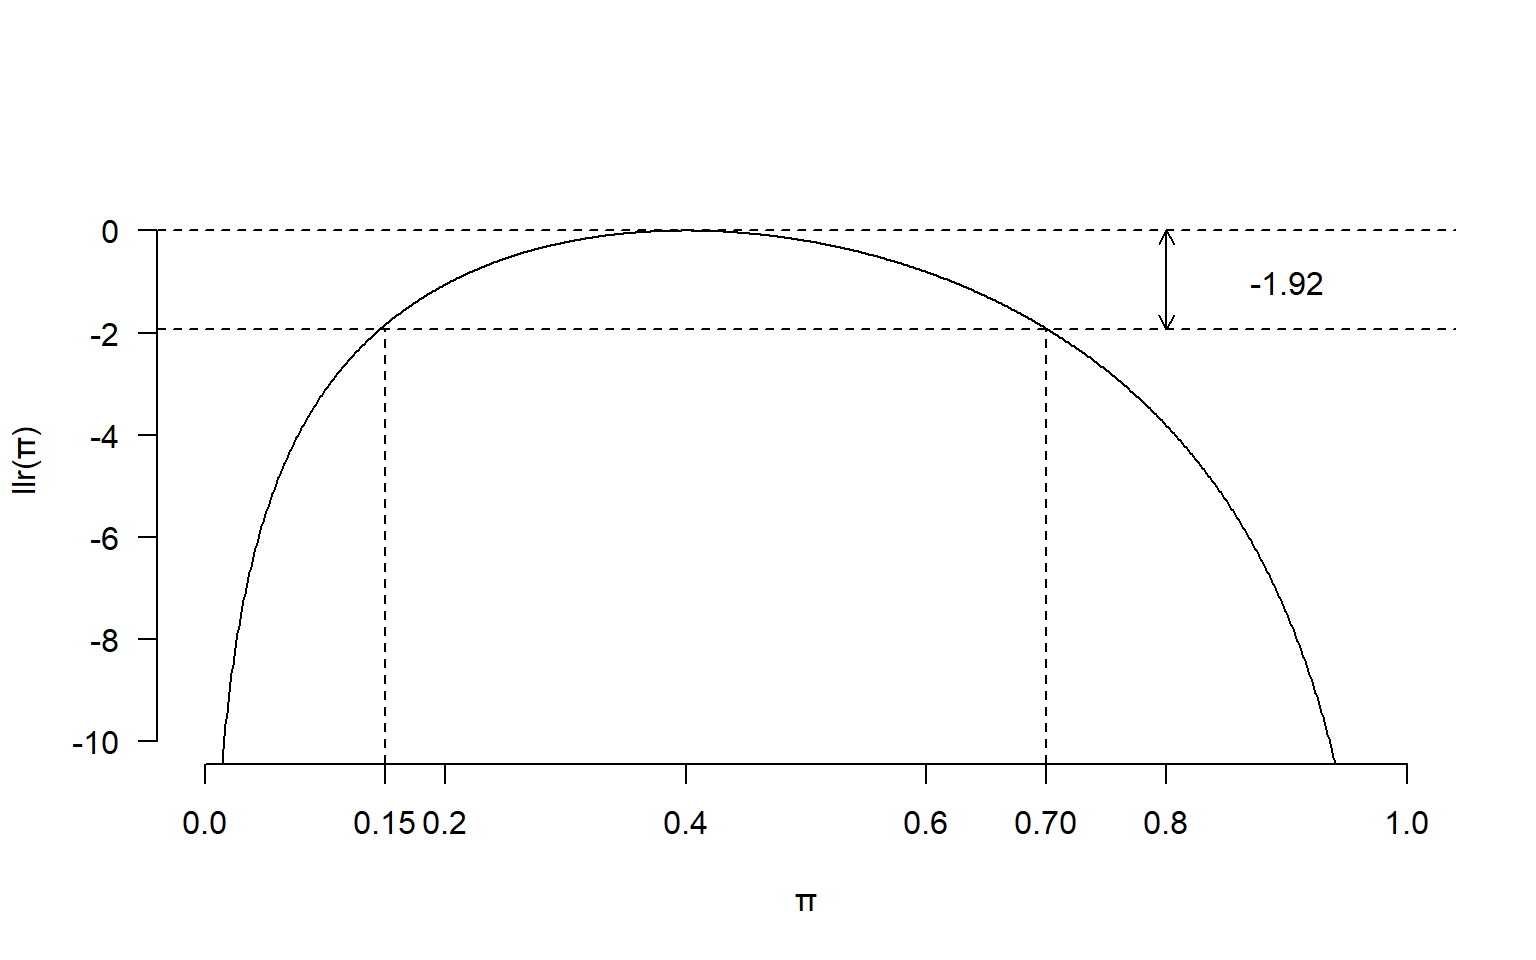 Log-likelihood ratio for binomial example, with 95% confidence intervals shown